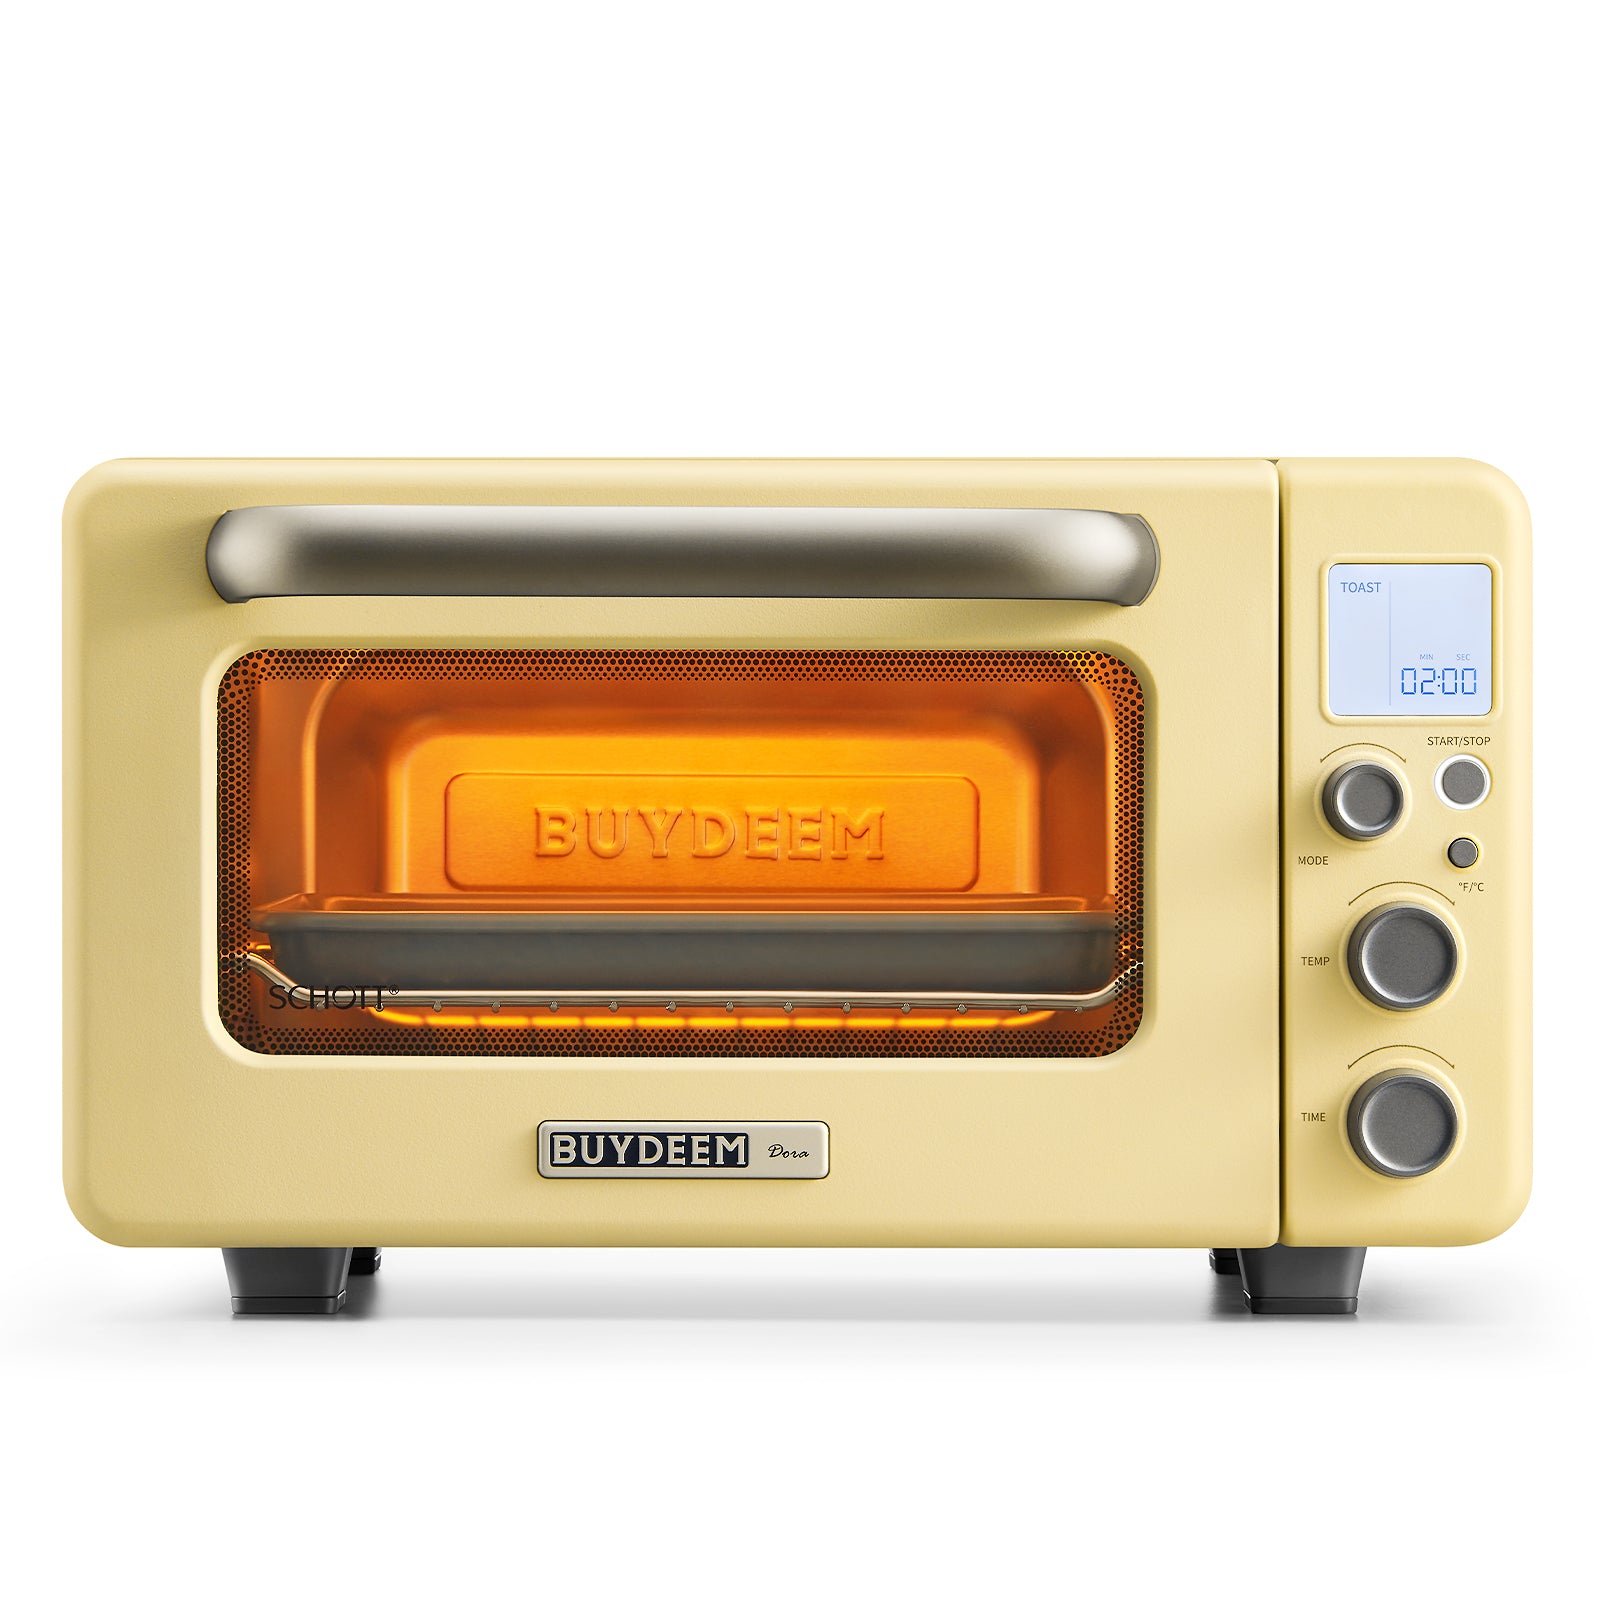 Small Toaster Ovens